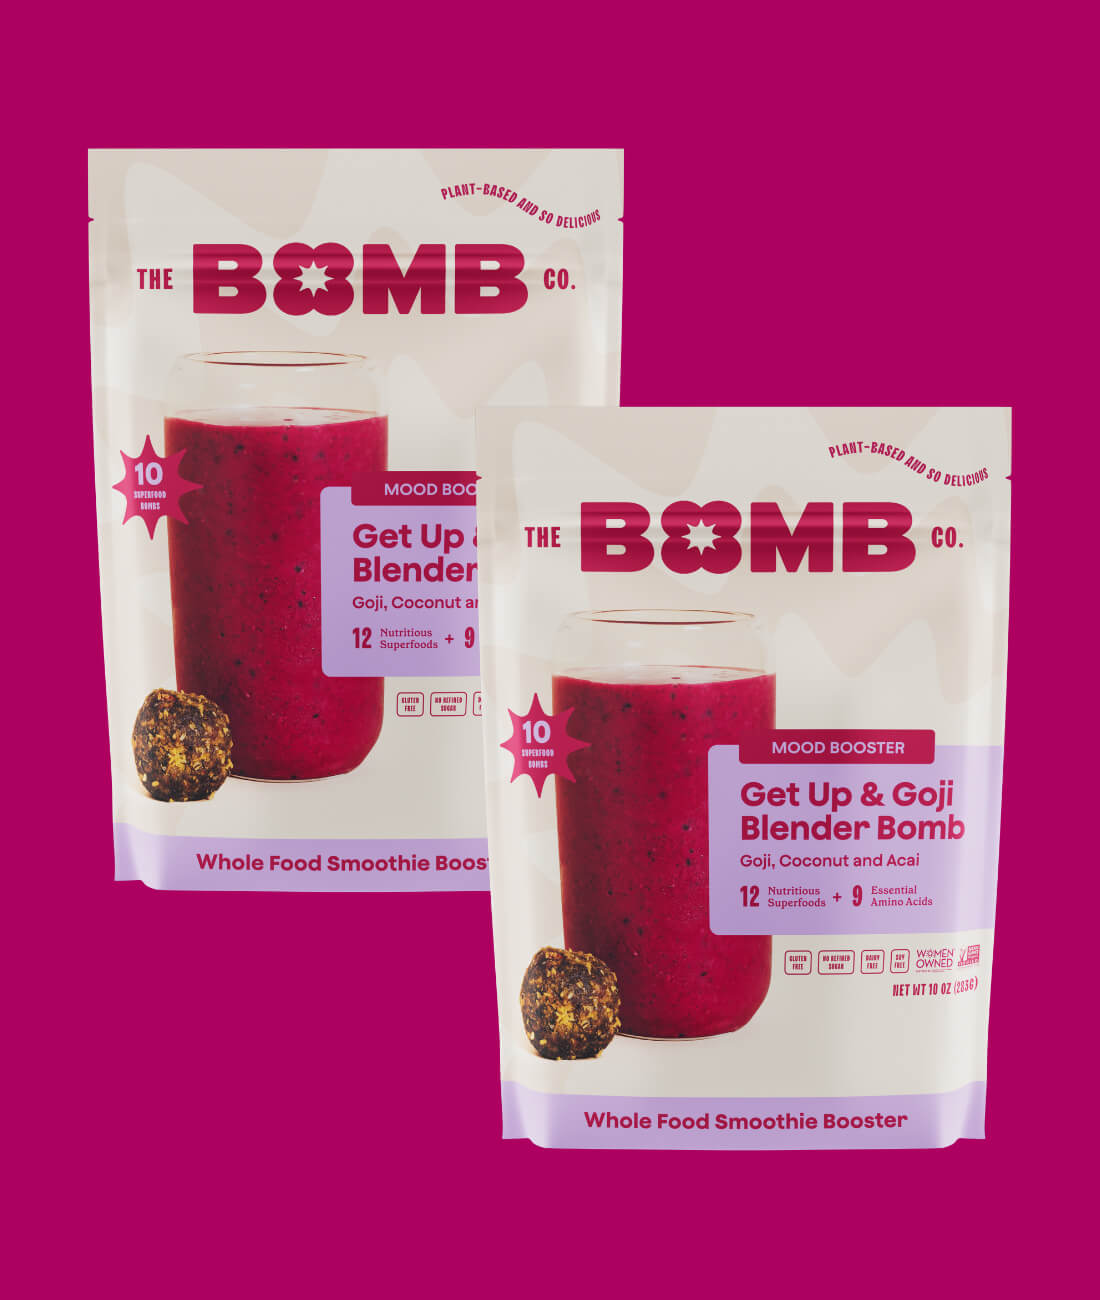 blender bombs provides the perfect ratio of fiber, fat, and protein. no